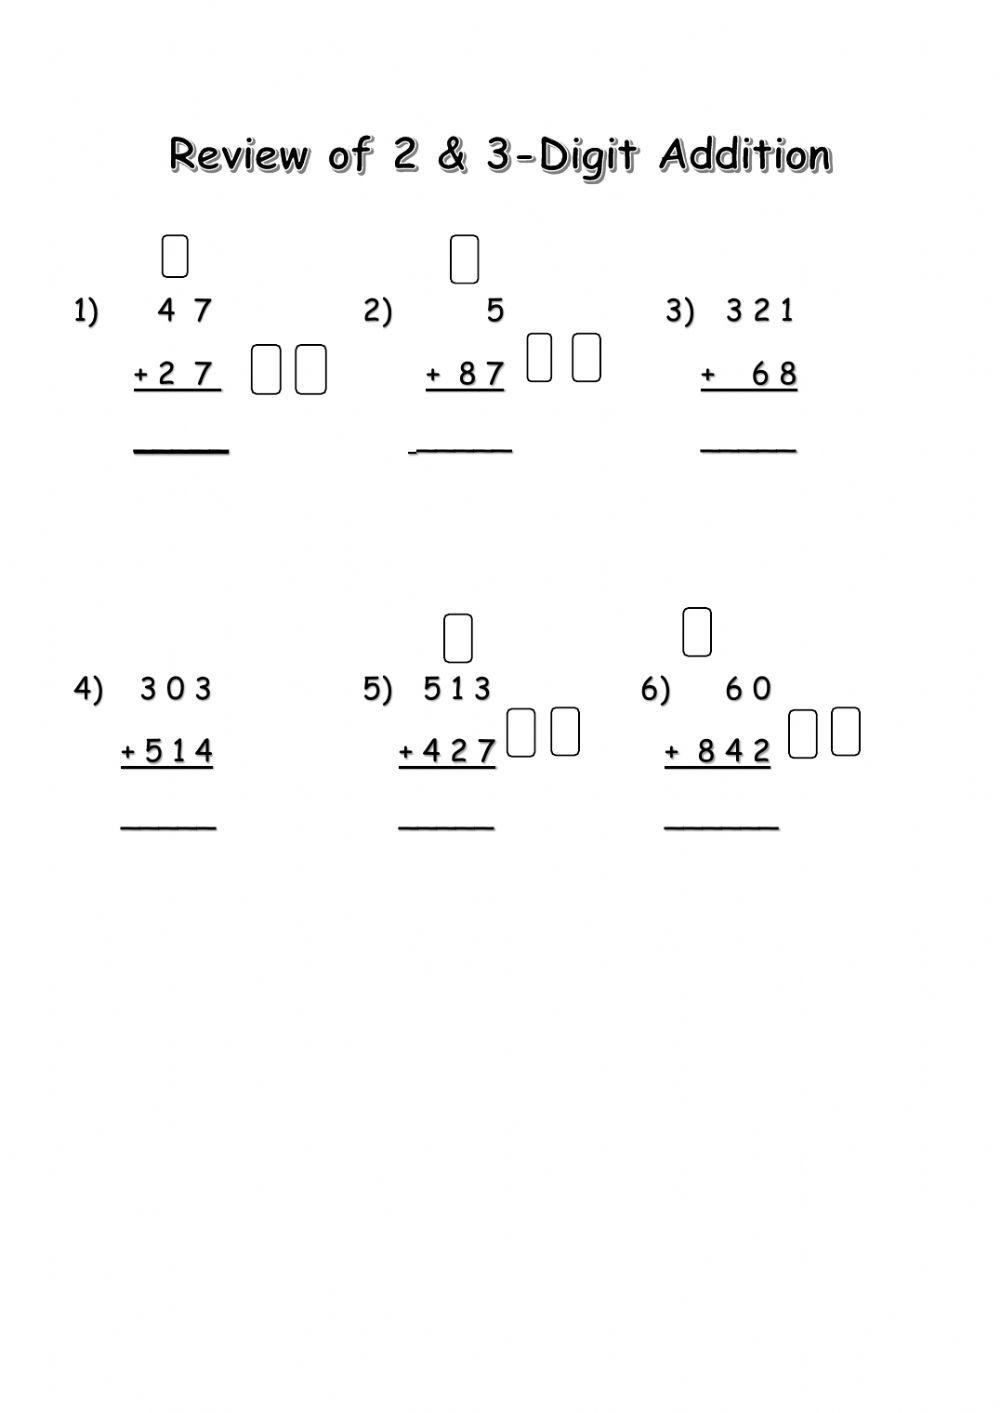 Review of 2 & 3 Digit Addition